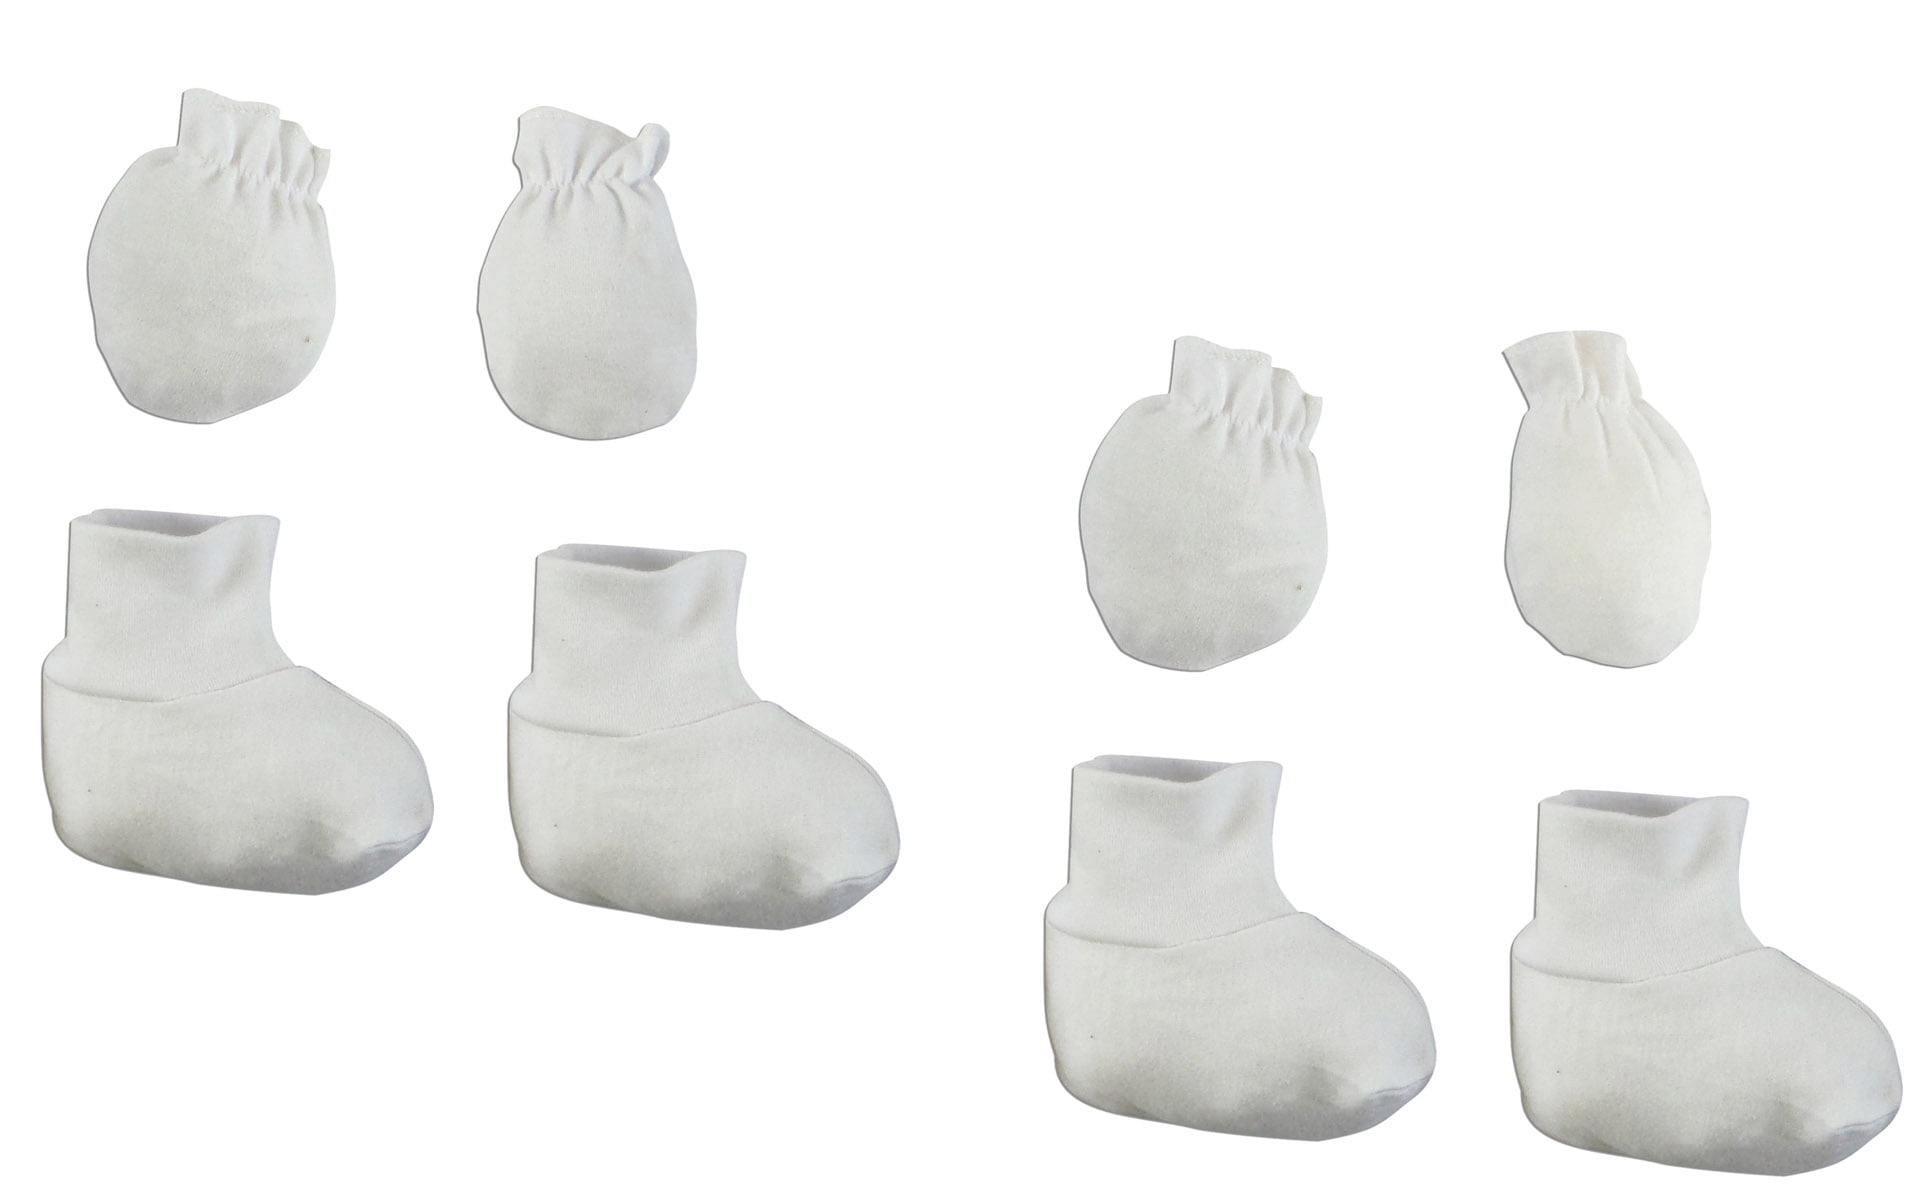 110-2-packs Infant Booties & Mitten Set, White - Pack Of 2